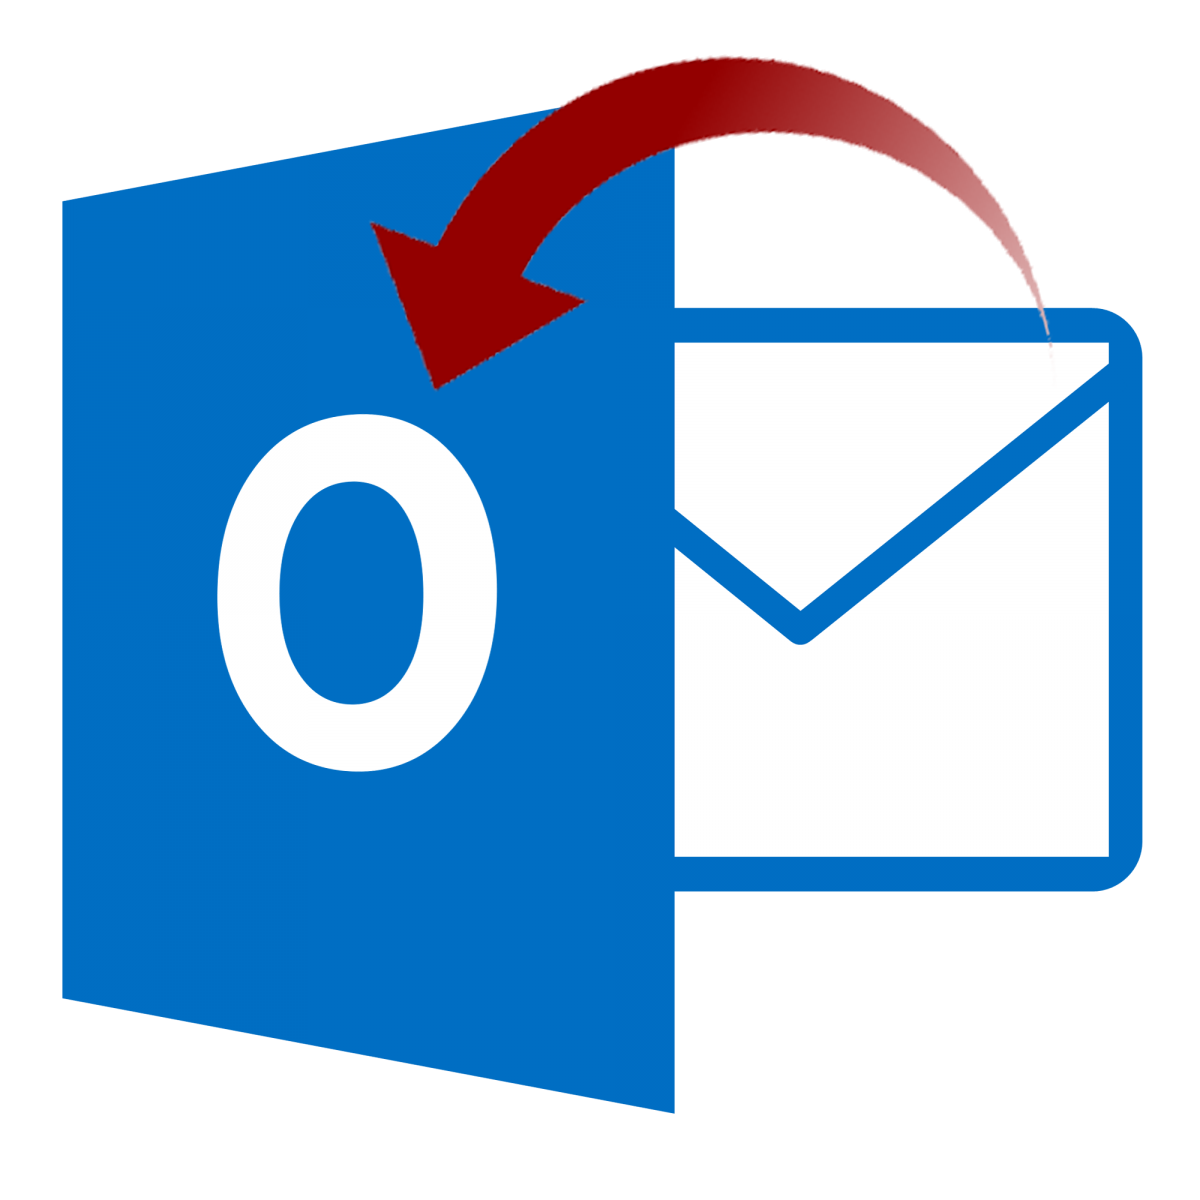 Download Free Outlook Office  Email 365 Microsoft ICON favicon |  FreePNGImg